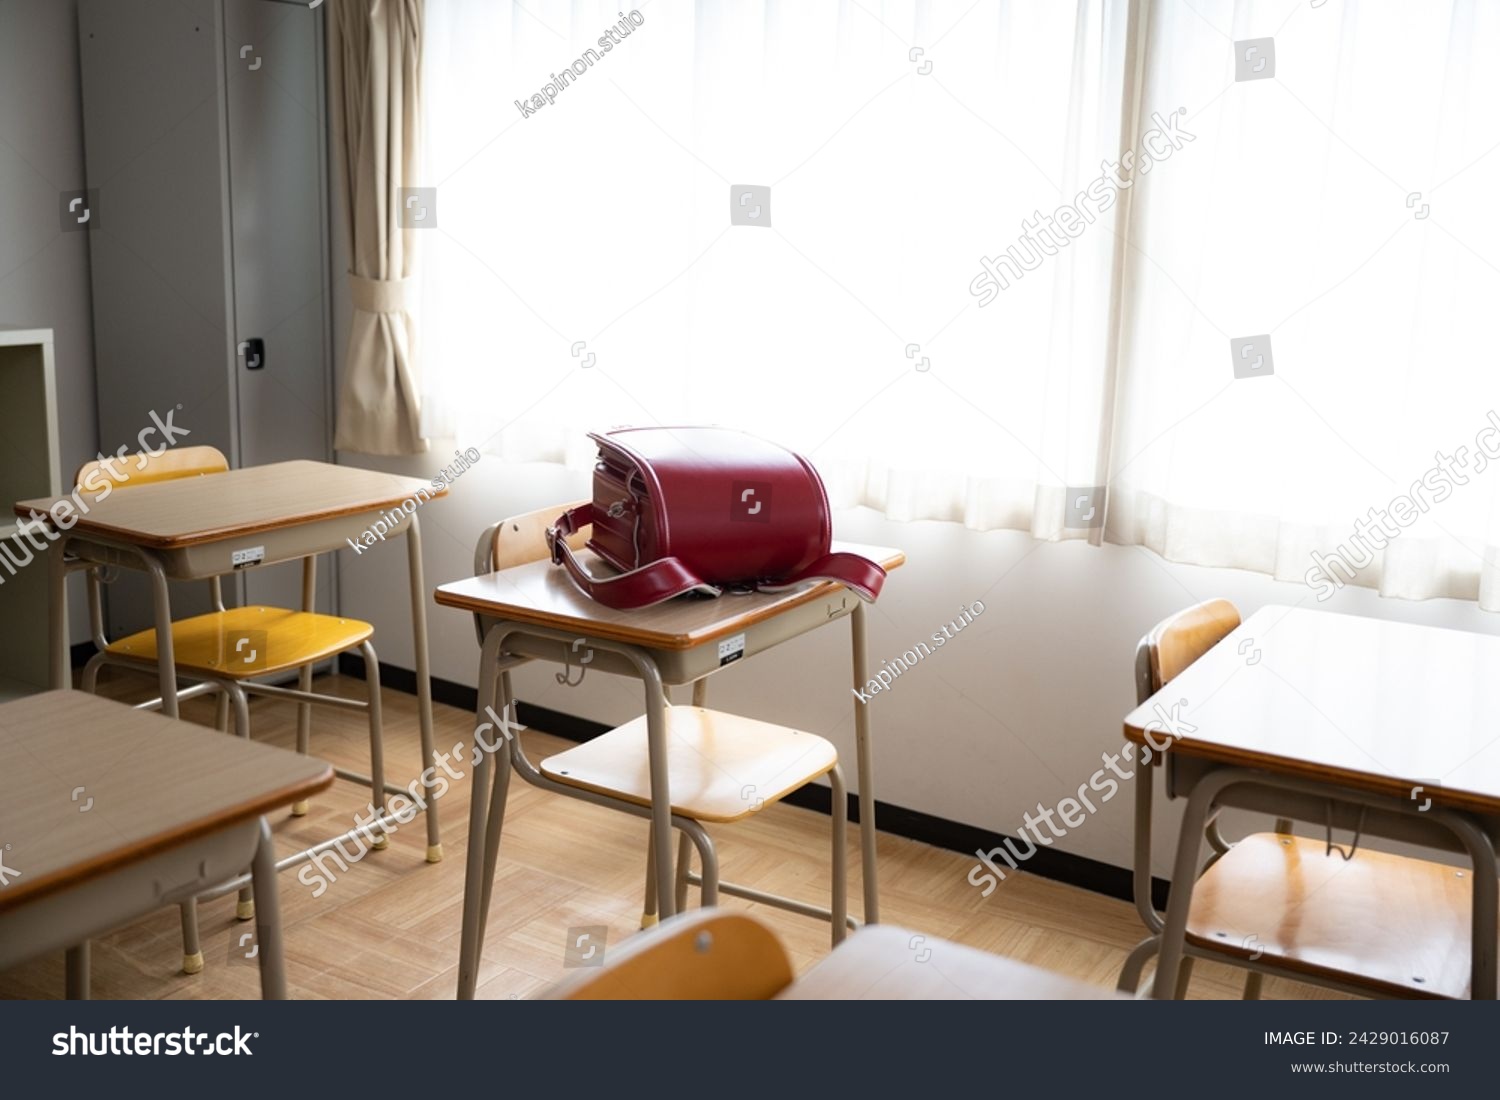 A school bag on a desk in a classroom at a Japanese elementary school during the daytime. #2429016087